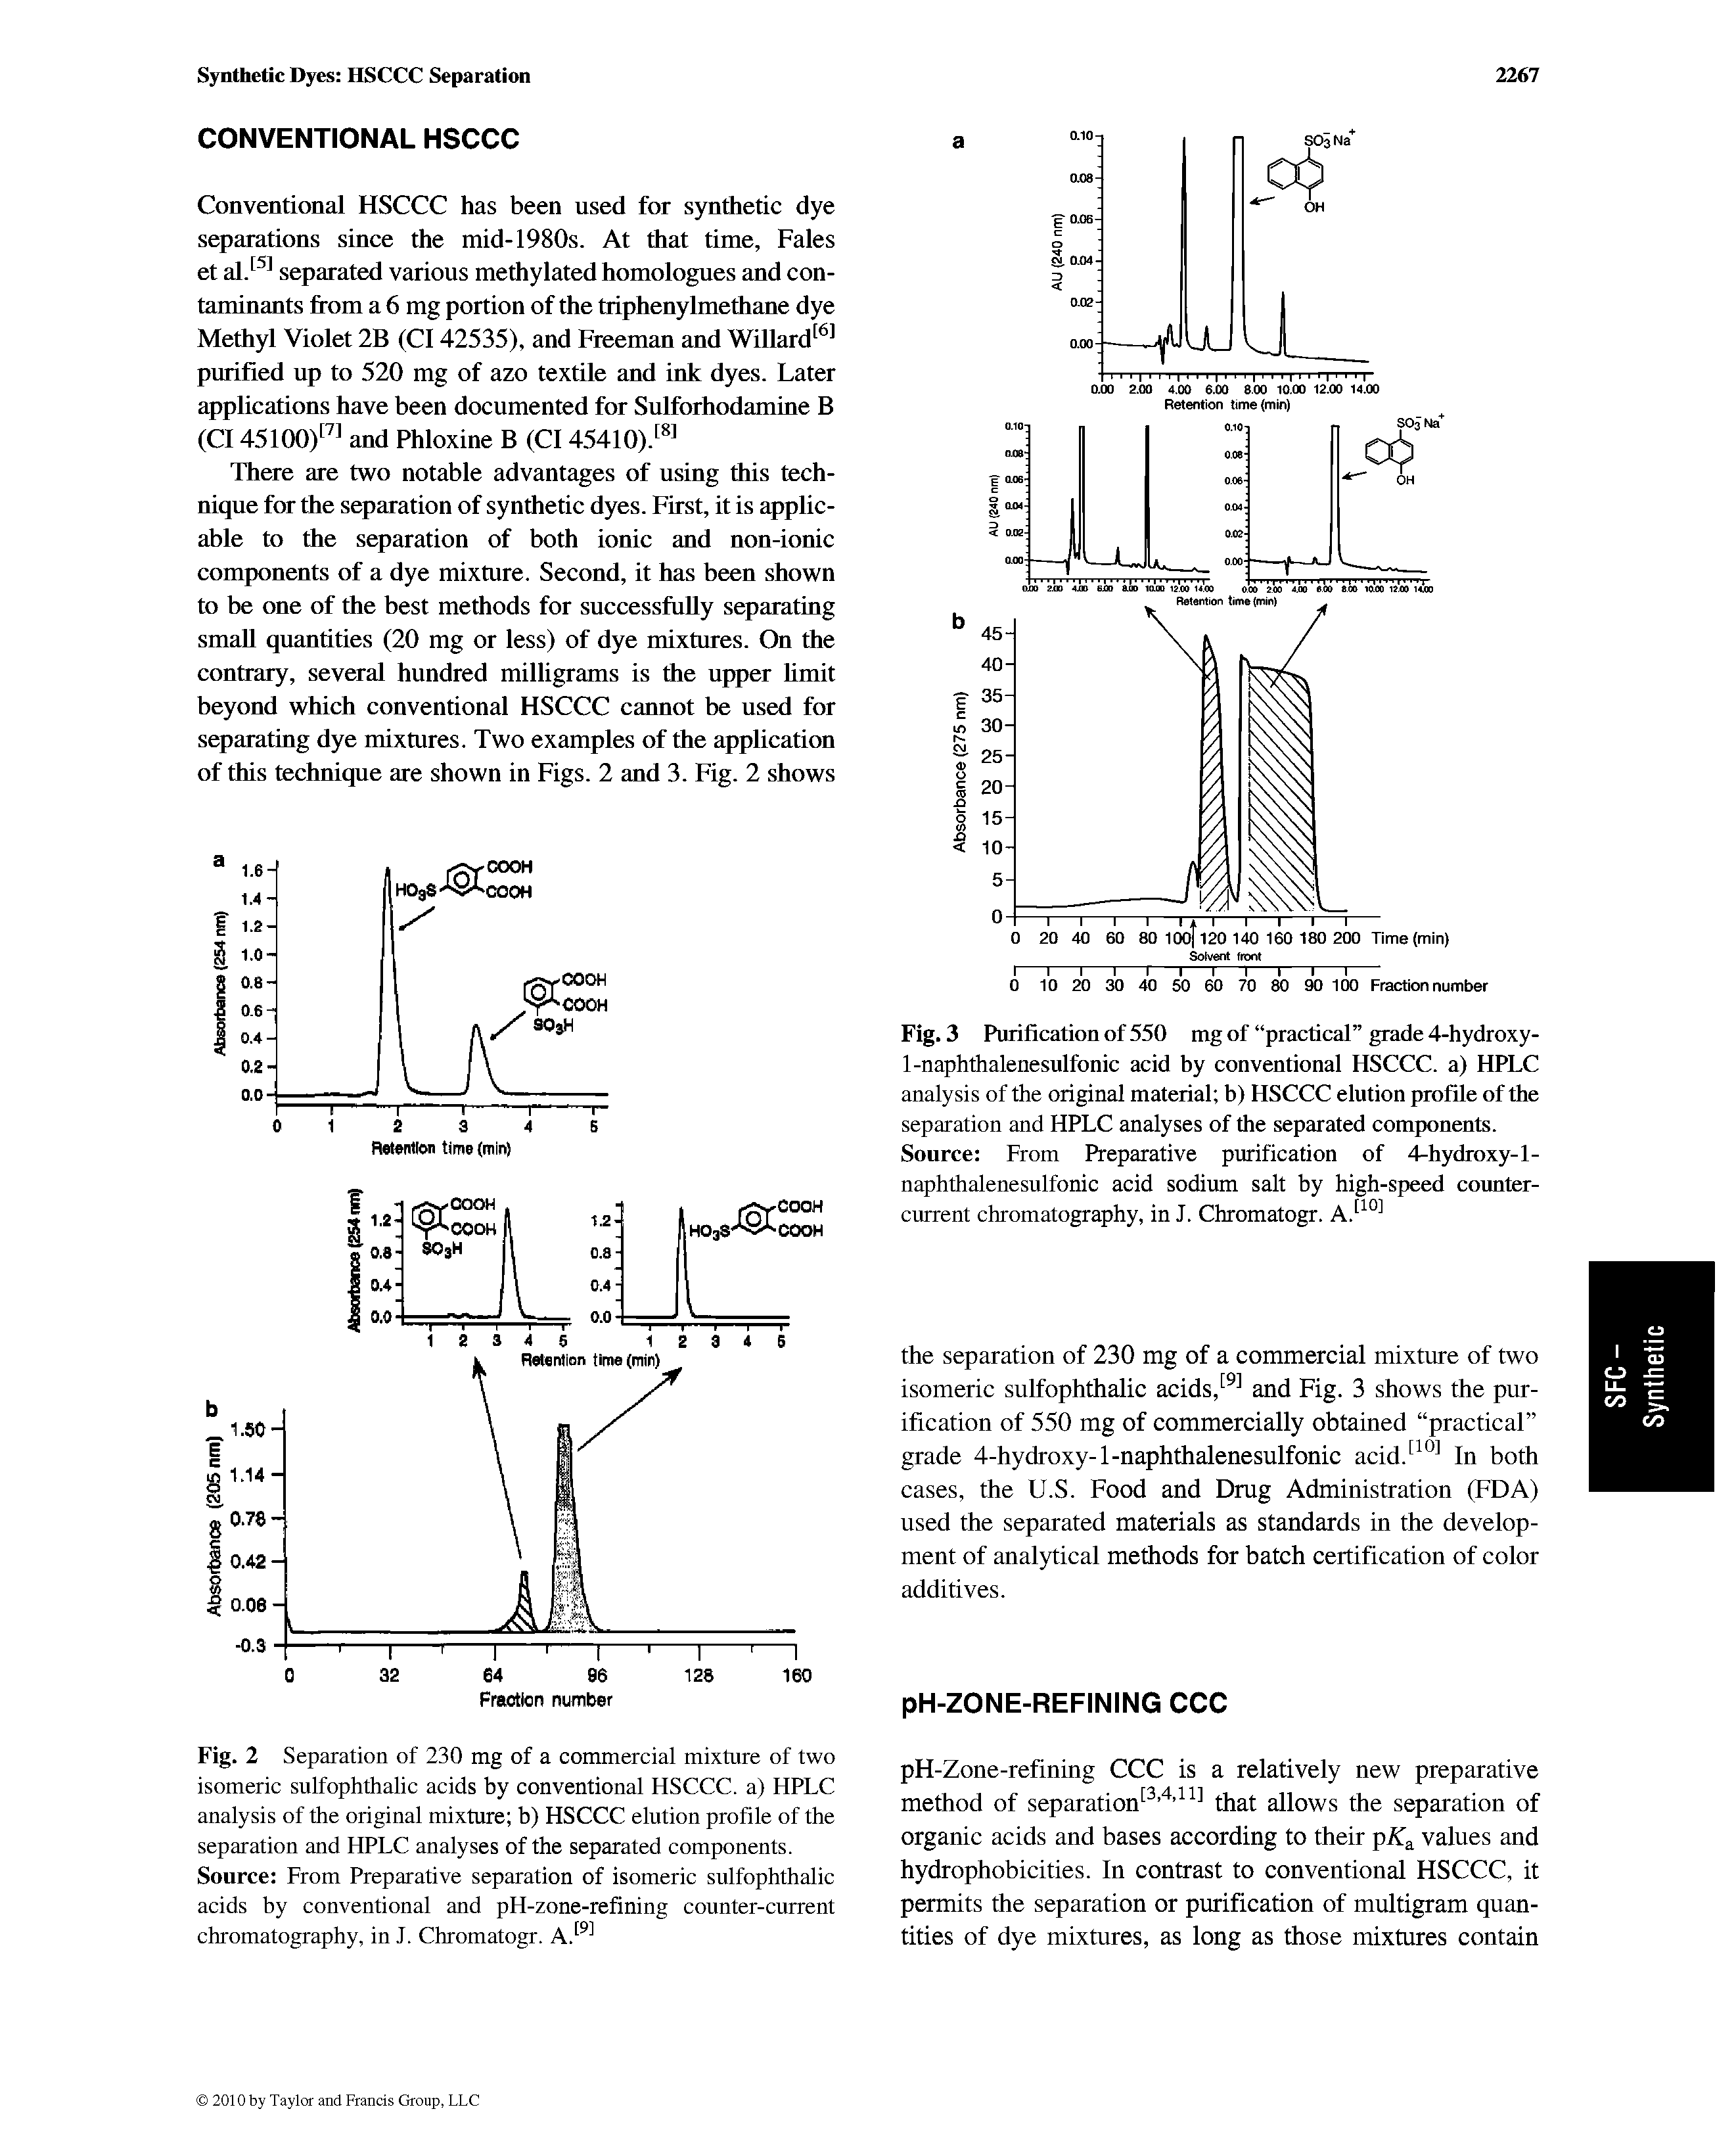 Fig. 3 Purification of550 mg of practical grade 4-hydroxy-1-naphthalenesulfonic acid by conventional HSCCC. a) HPLC analysis of the original material b) HSCCC elution profile of the separation and HPLC analyses of the separated components. Source From Preparative purification of 4-hydroxy-l-naphthalenesulfonic acid sodium salt by high-speed counter-current chromatography, in J. Chromatogr. A. ° ...